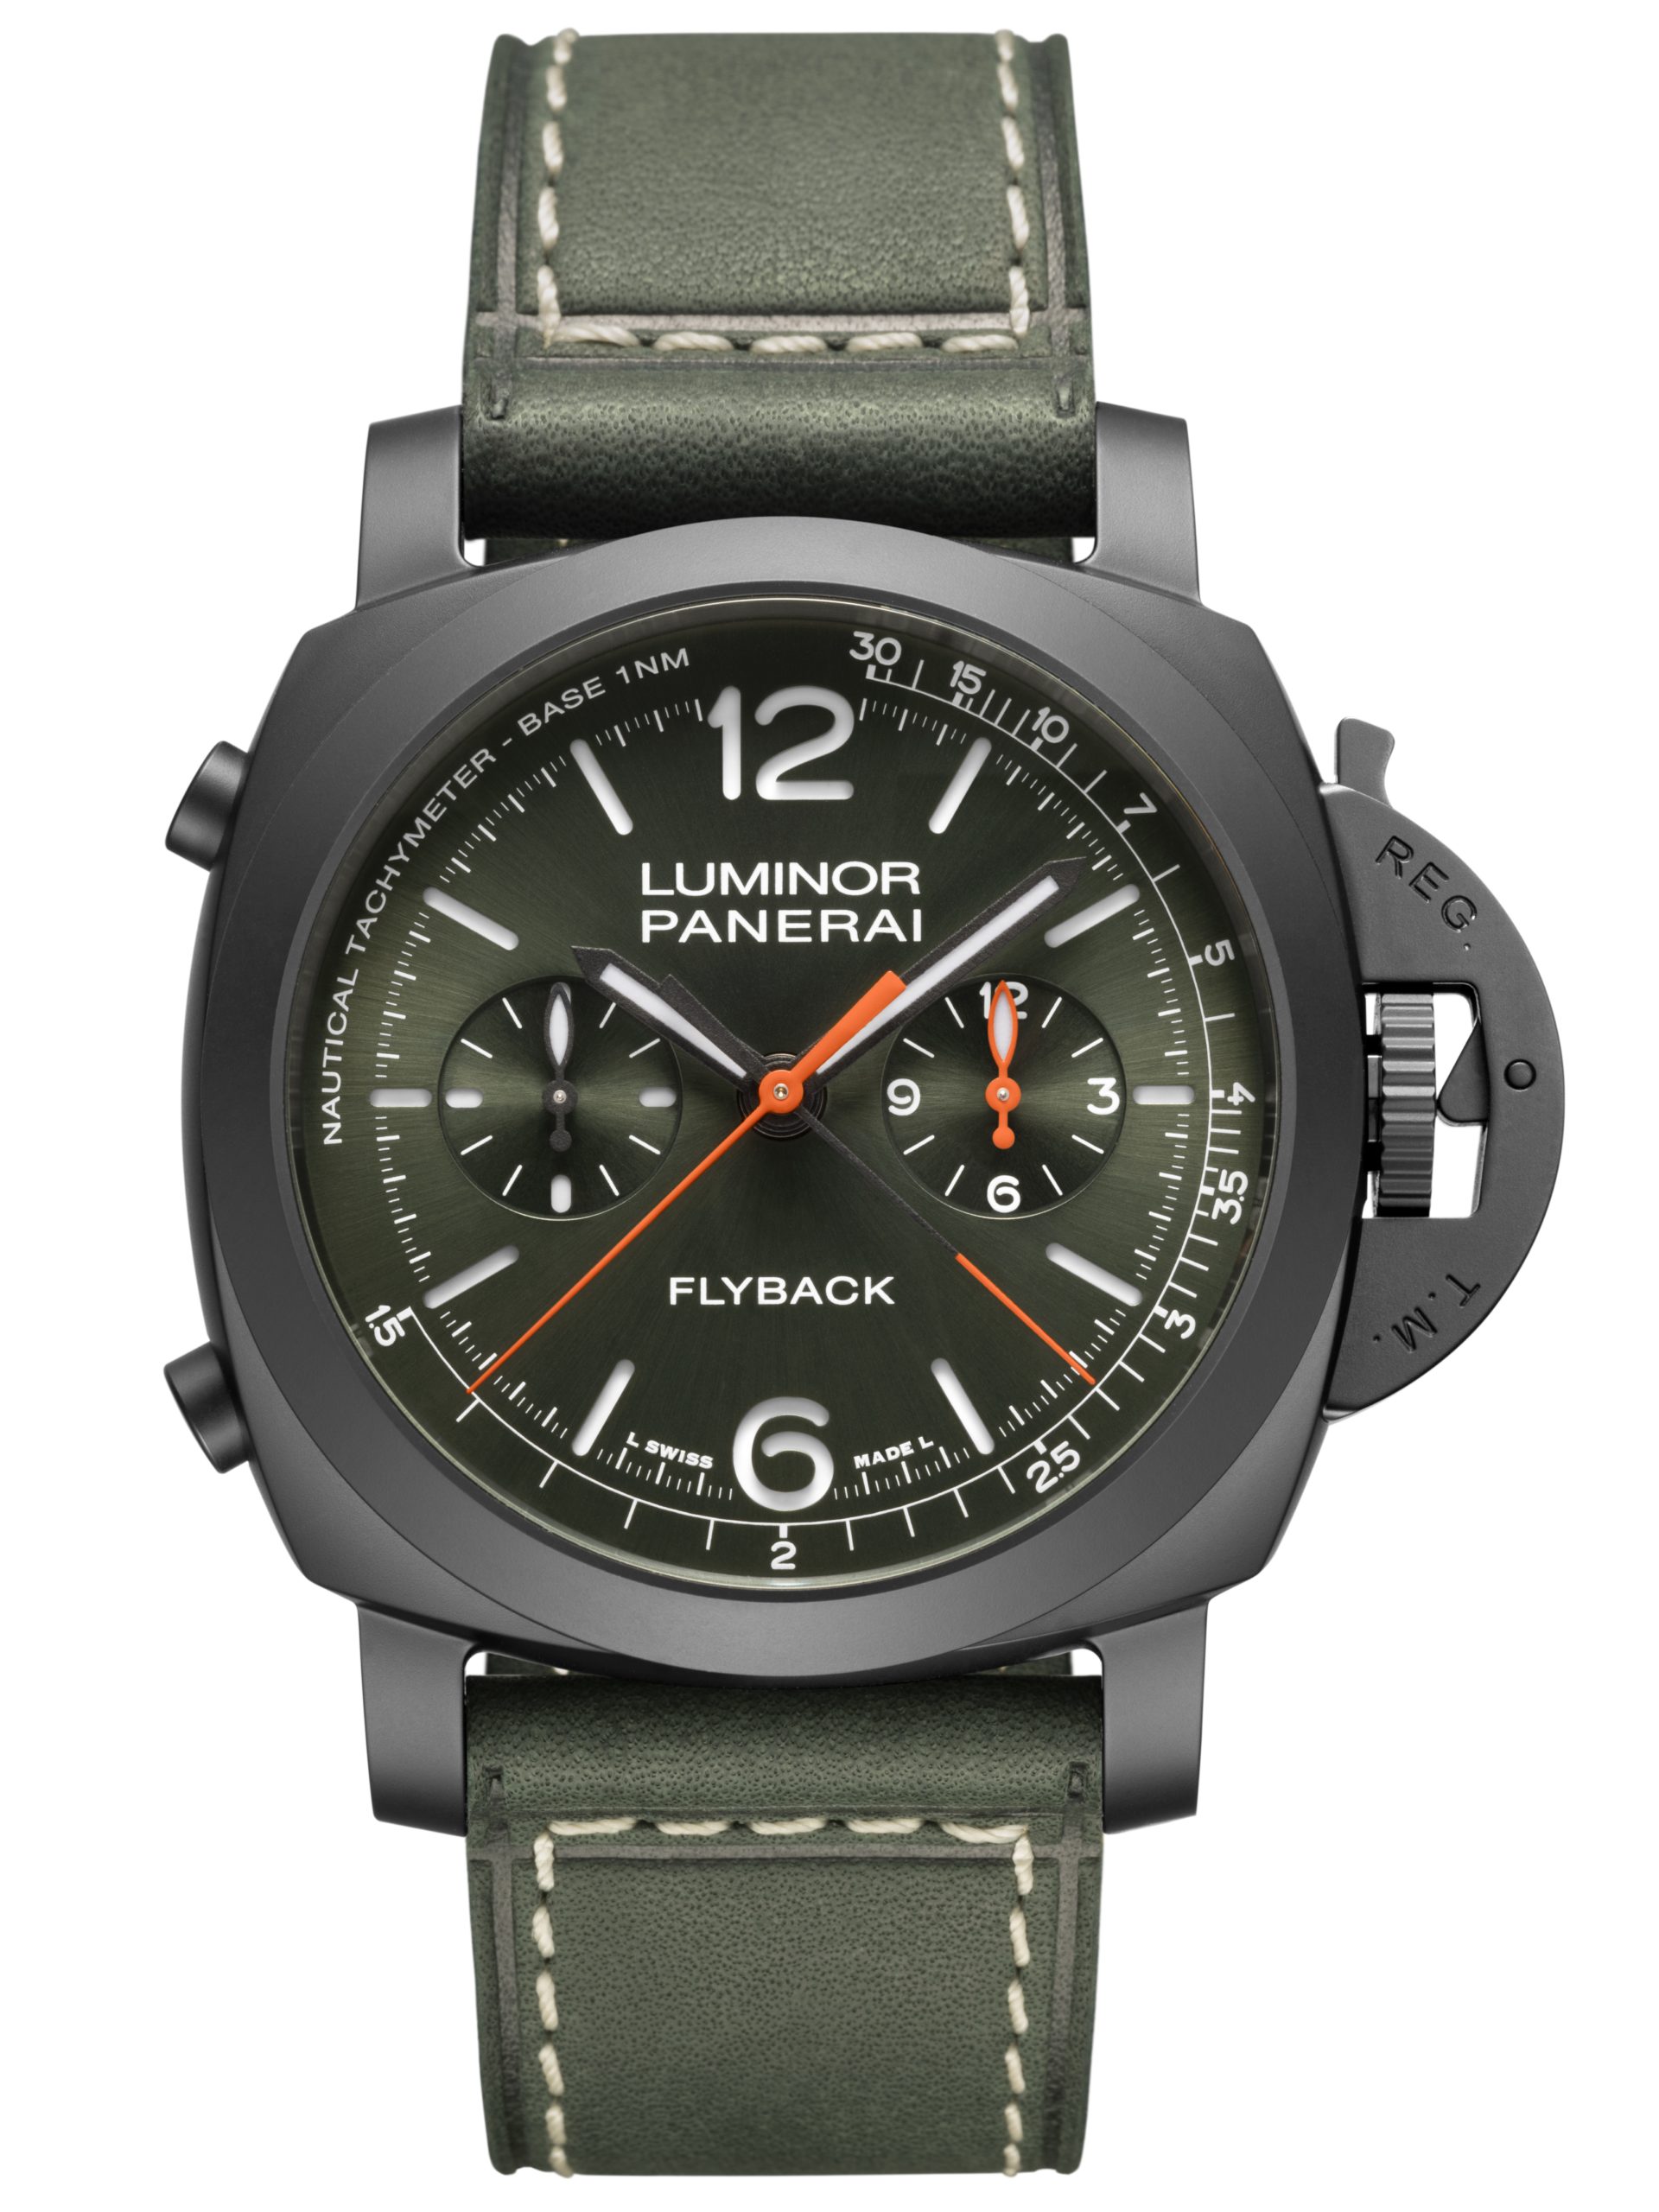 Replica Panerai Launches Limited Edition of Luminor Flyback Chronograph